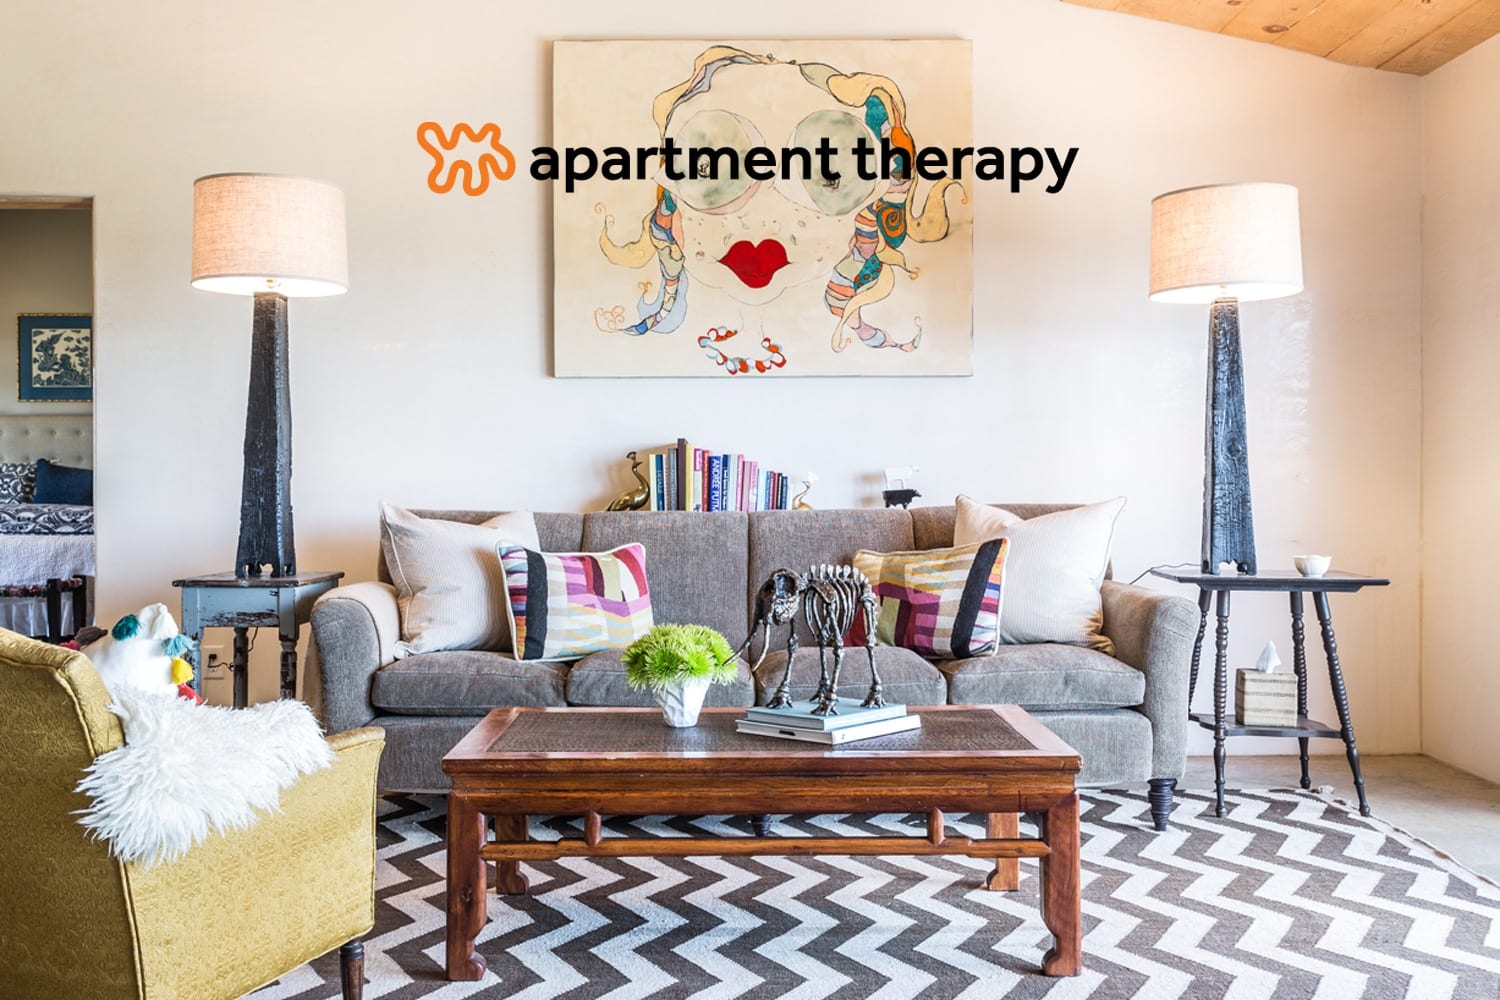 French & French Interiors Santa Fe home featured on Apartment Therapy!